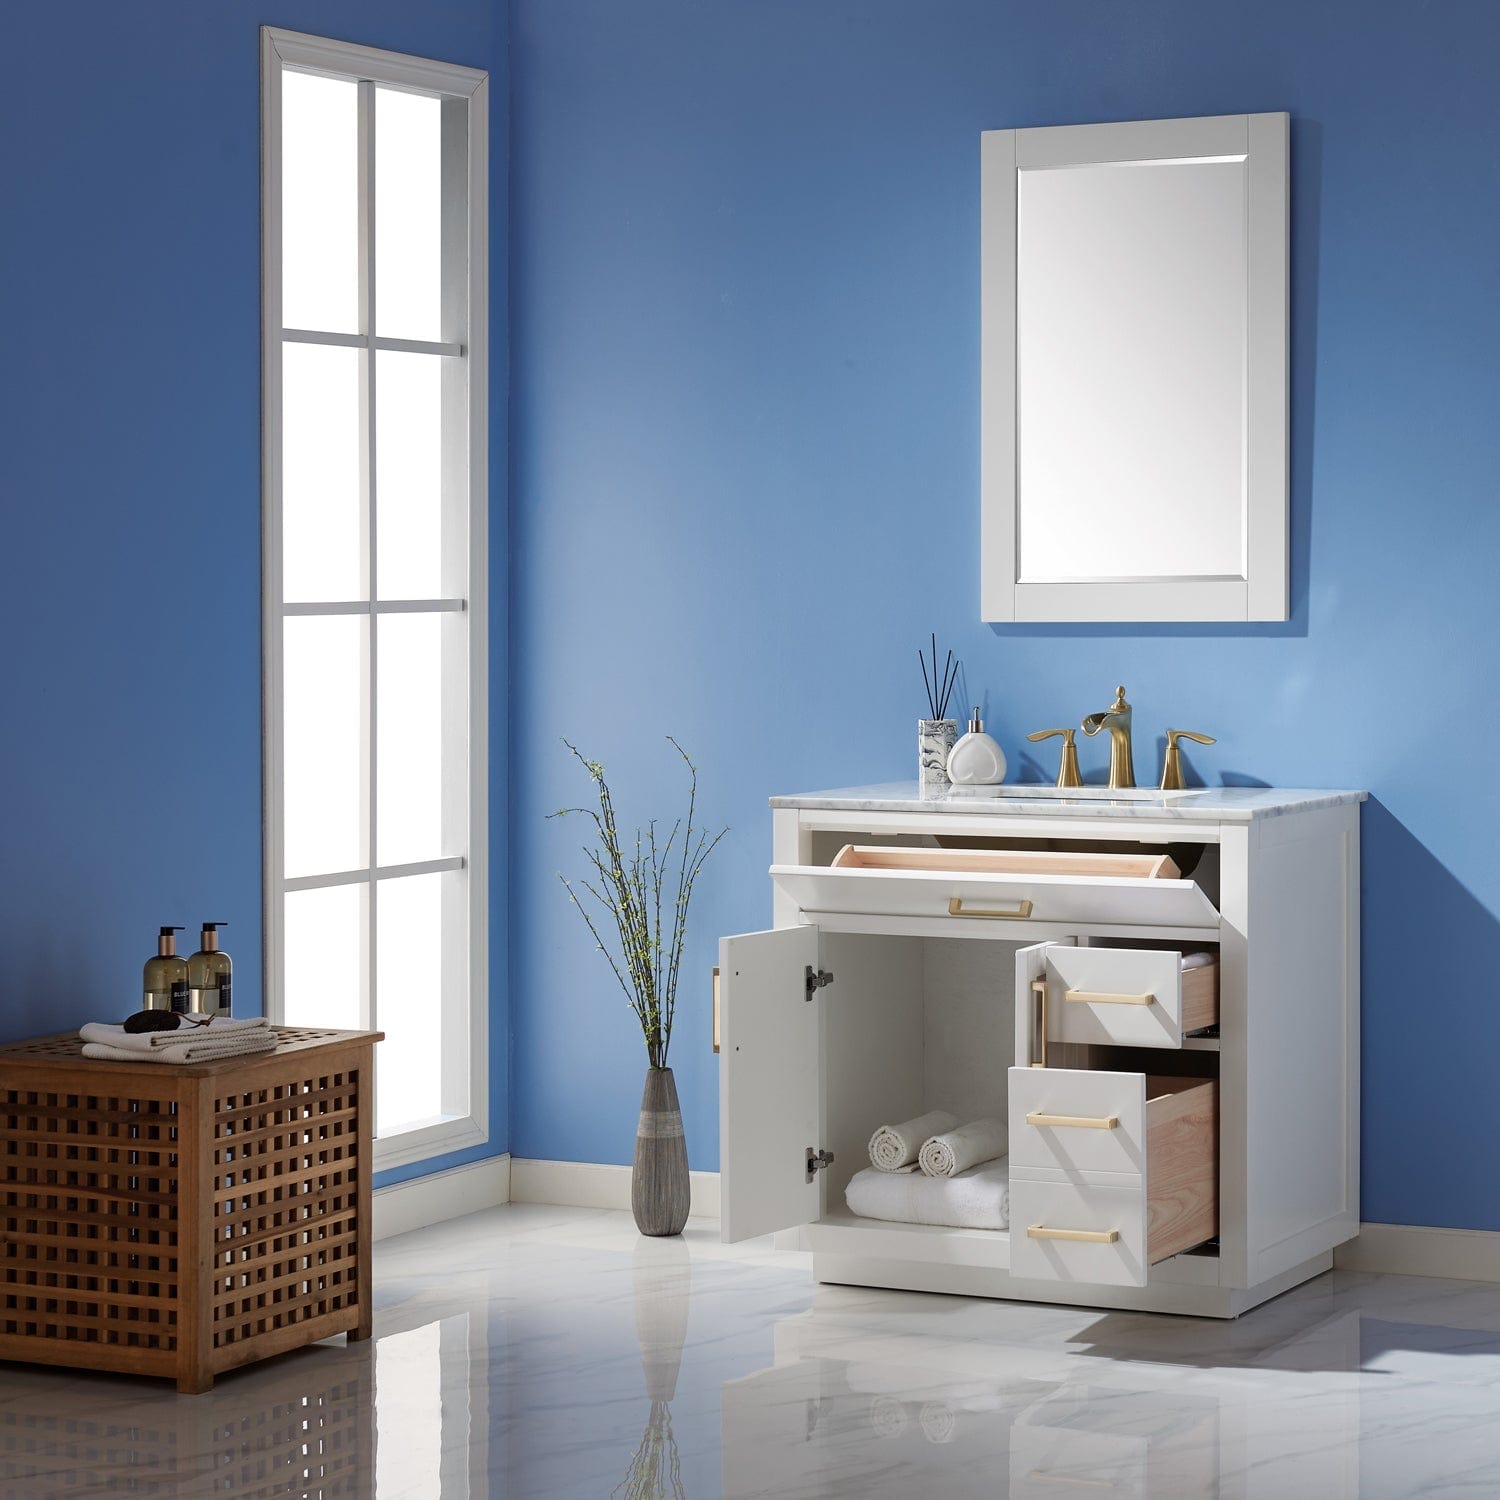 Altair Ivy 36" Single Bathroom Vanity Set in White and Carrara White Marble Countertop with Mirror 531036-WH-CA - Molaix631112971133Vanity531036-WH-CA